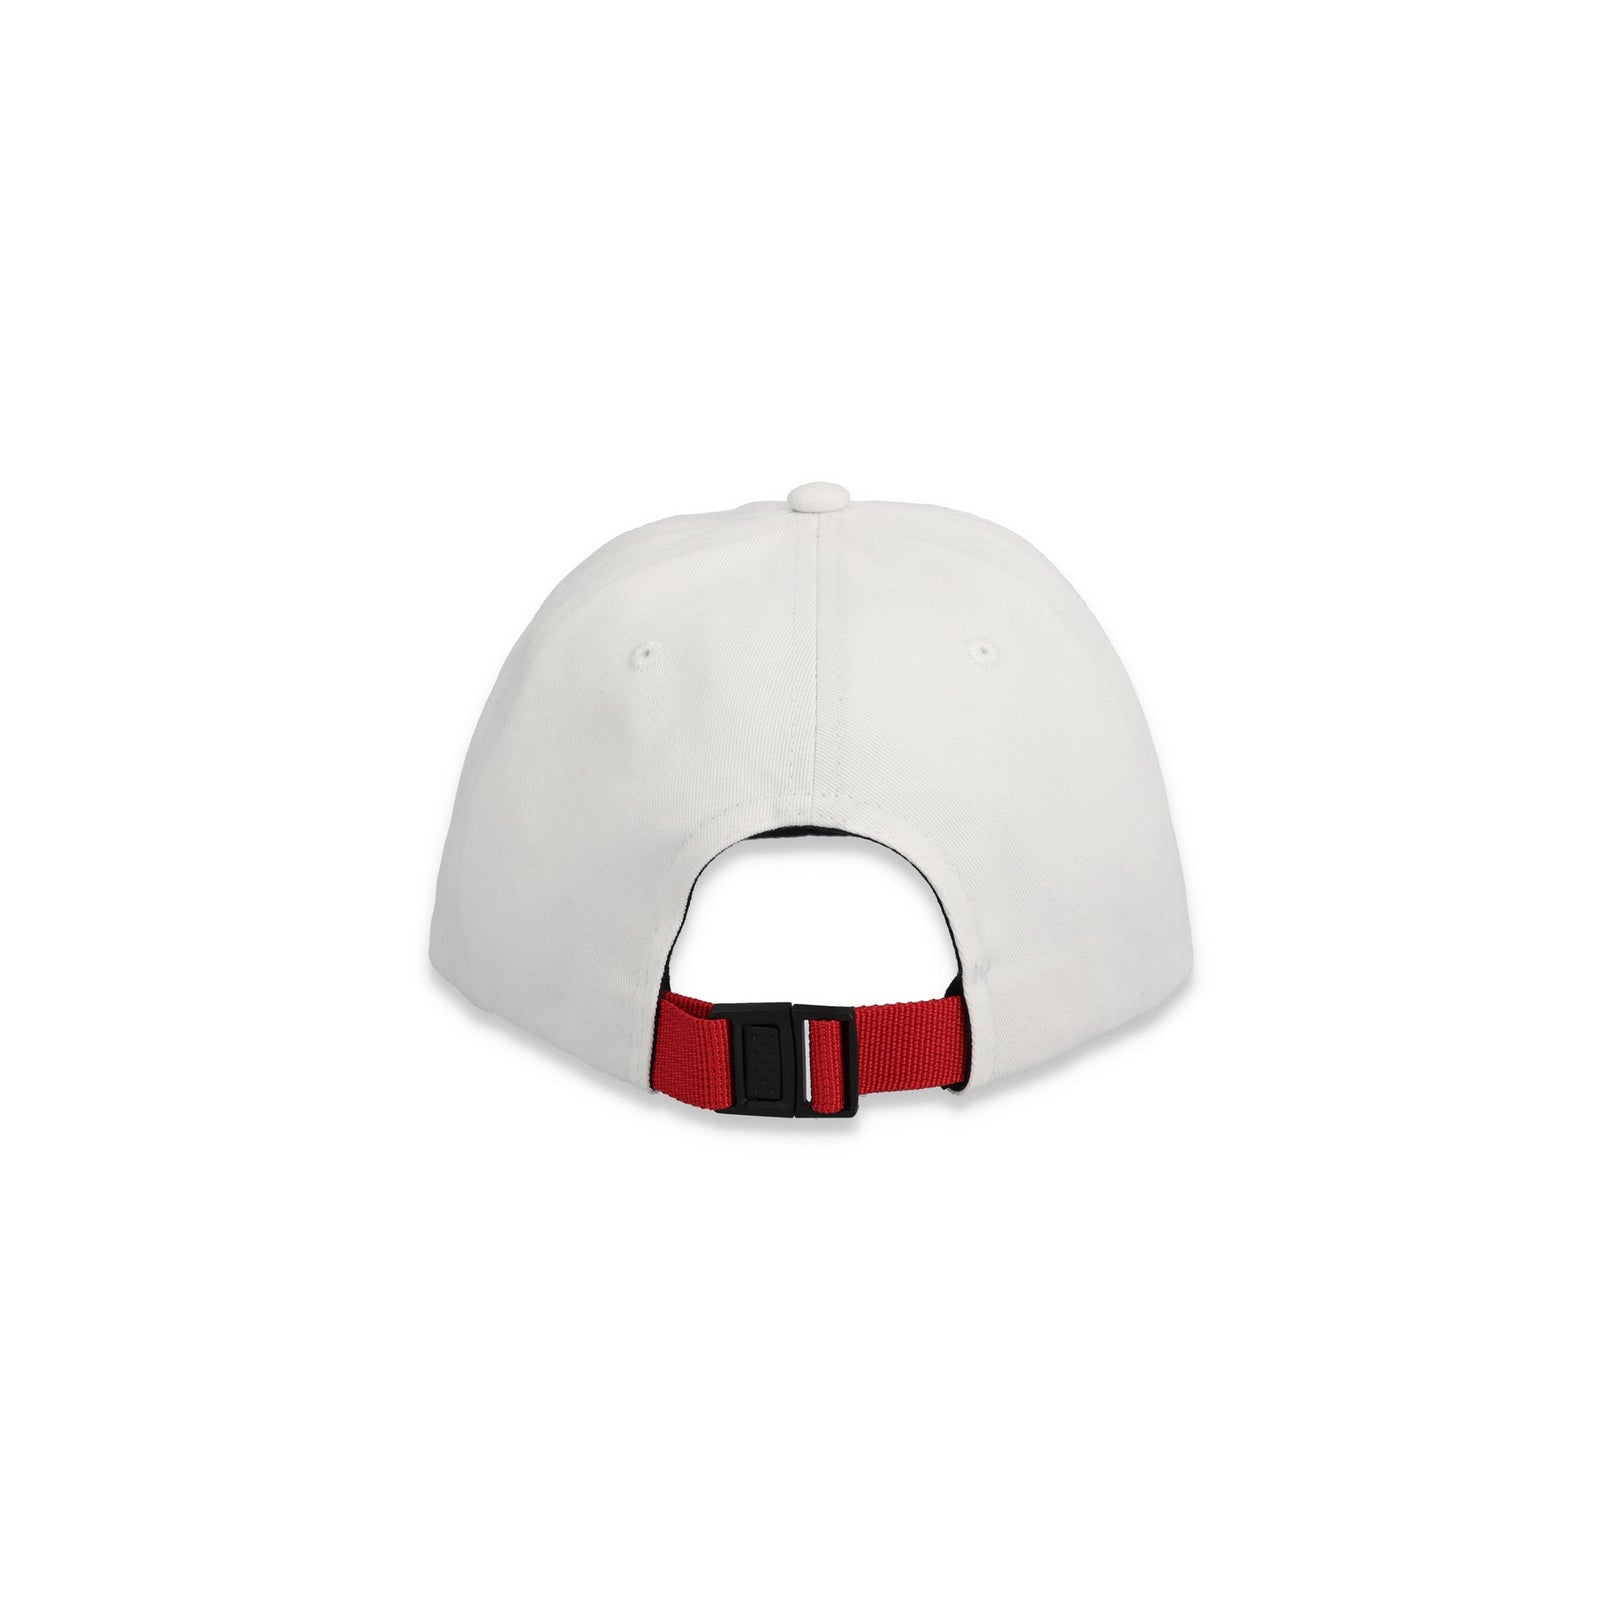 Adjustable back strop on Topo Designs Mountain Ball Cap cotton embroidered logo baseball hat in "Natural" white.